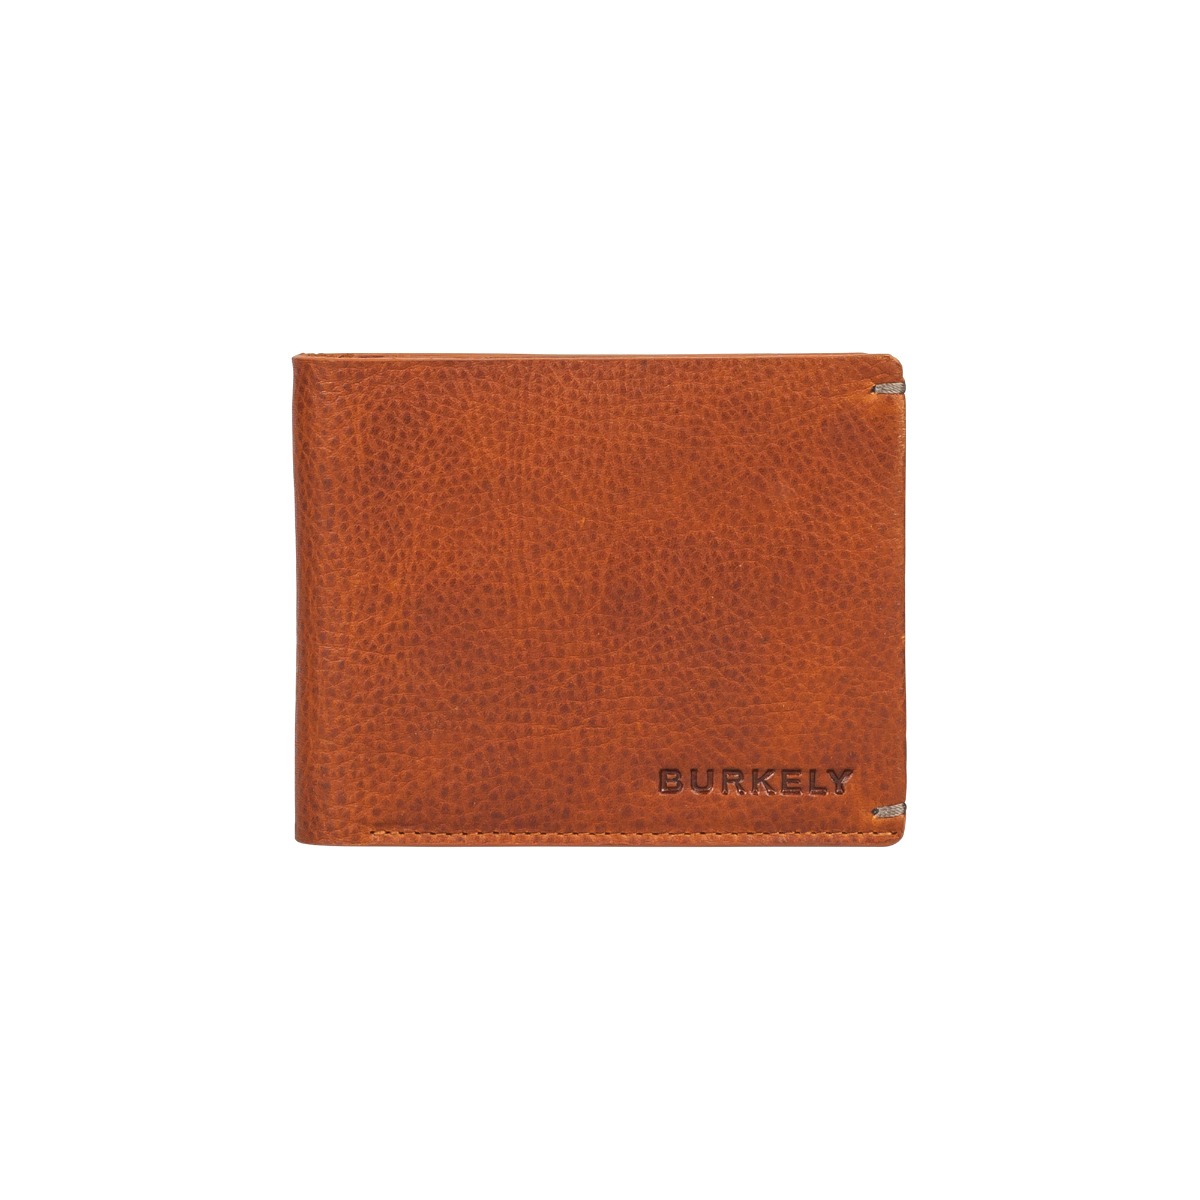 Burkely Antique Avery Billfold Low Coin wallet Cognac